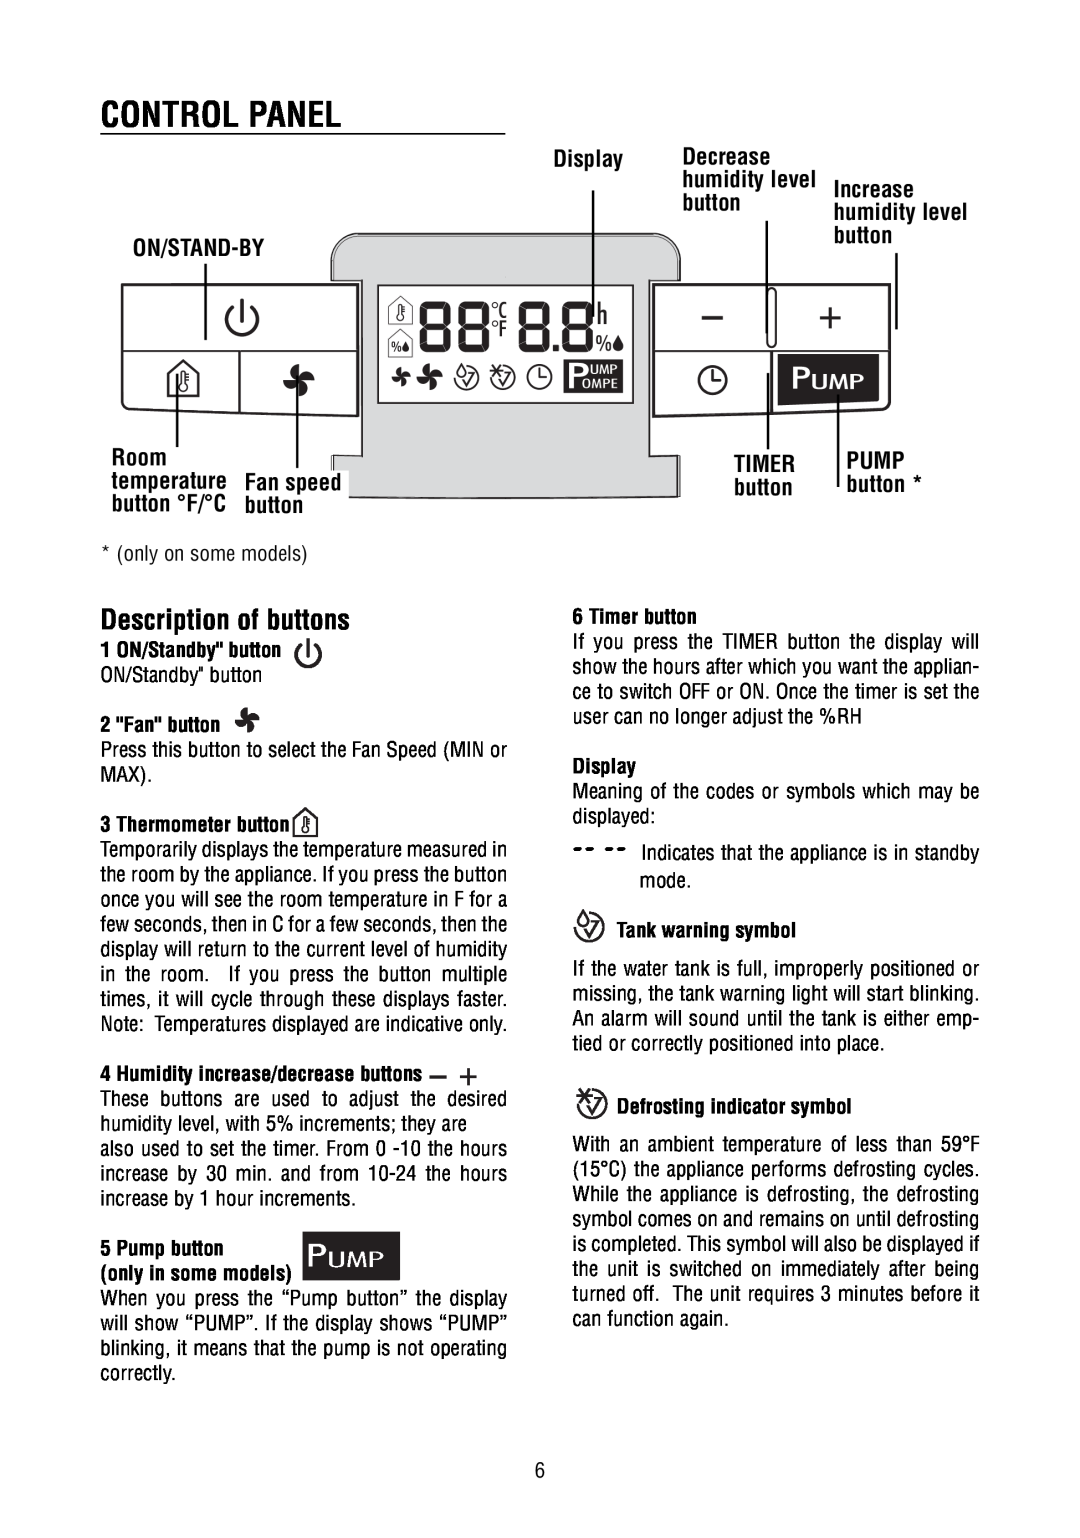 DeLonghi DD45 Control Panel, Description of buttons, Display ON/STAND-BY, Room temperature Fan speed button F/C button 